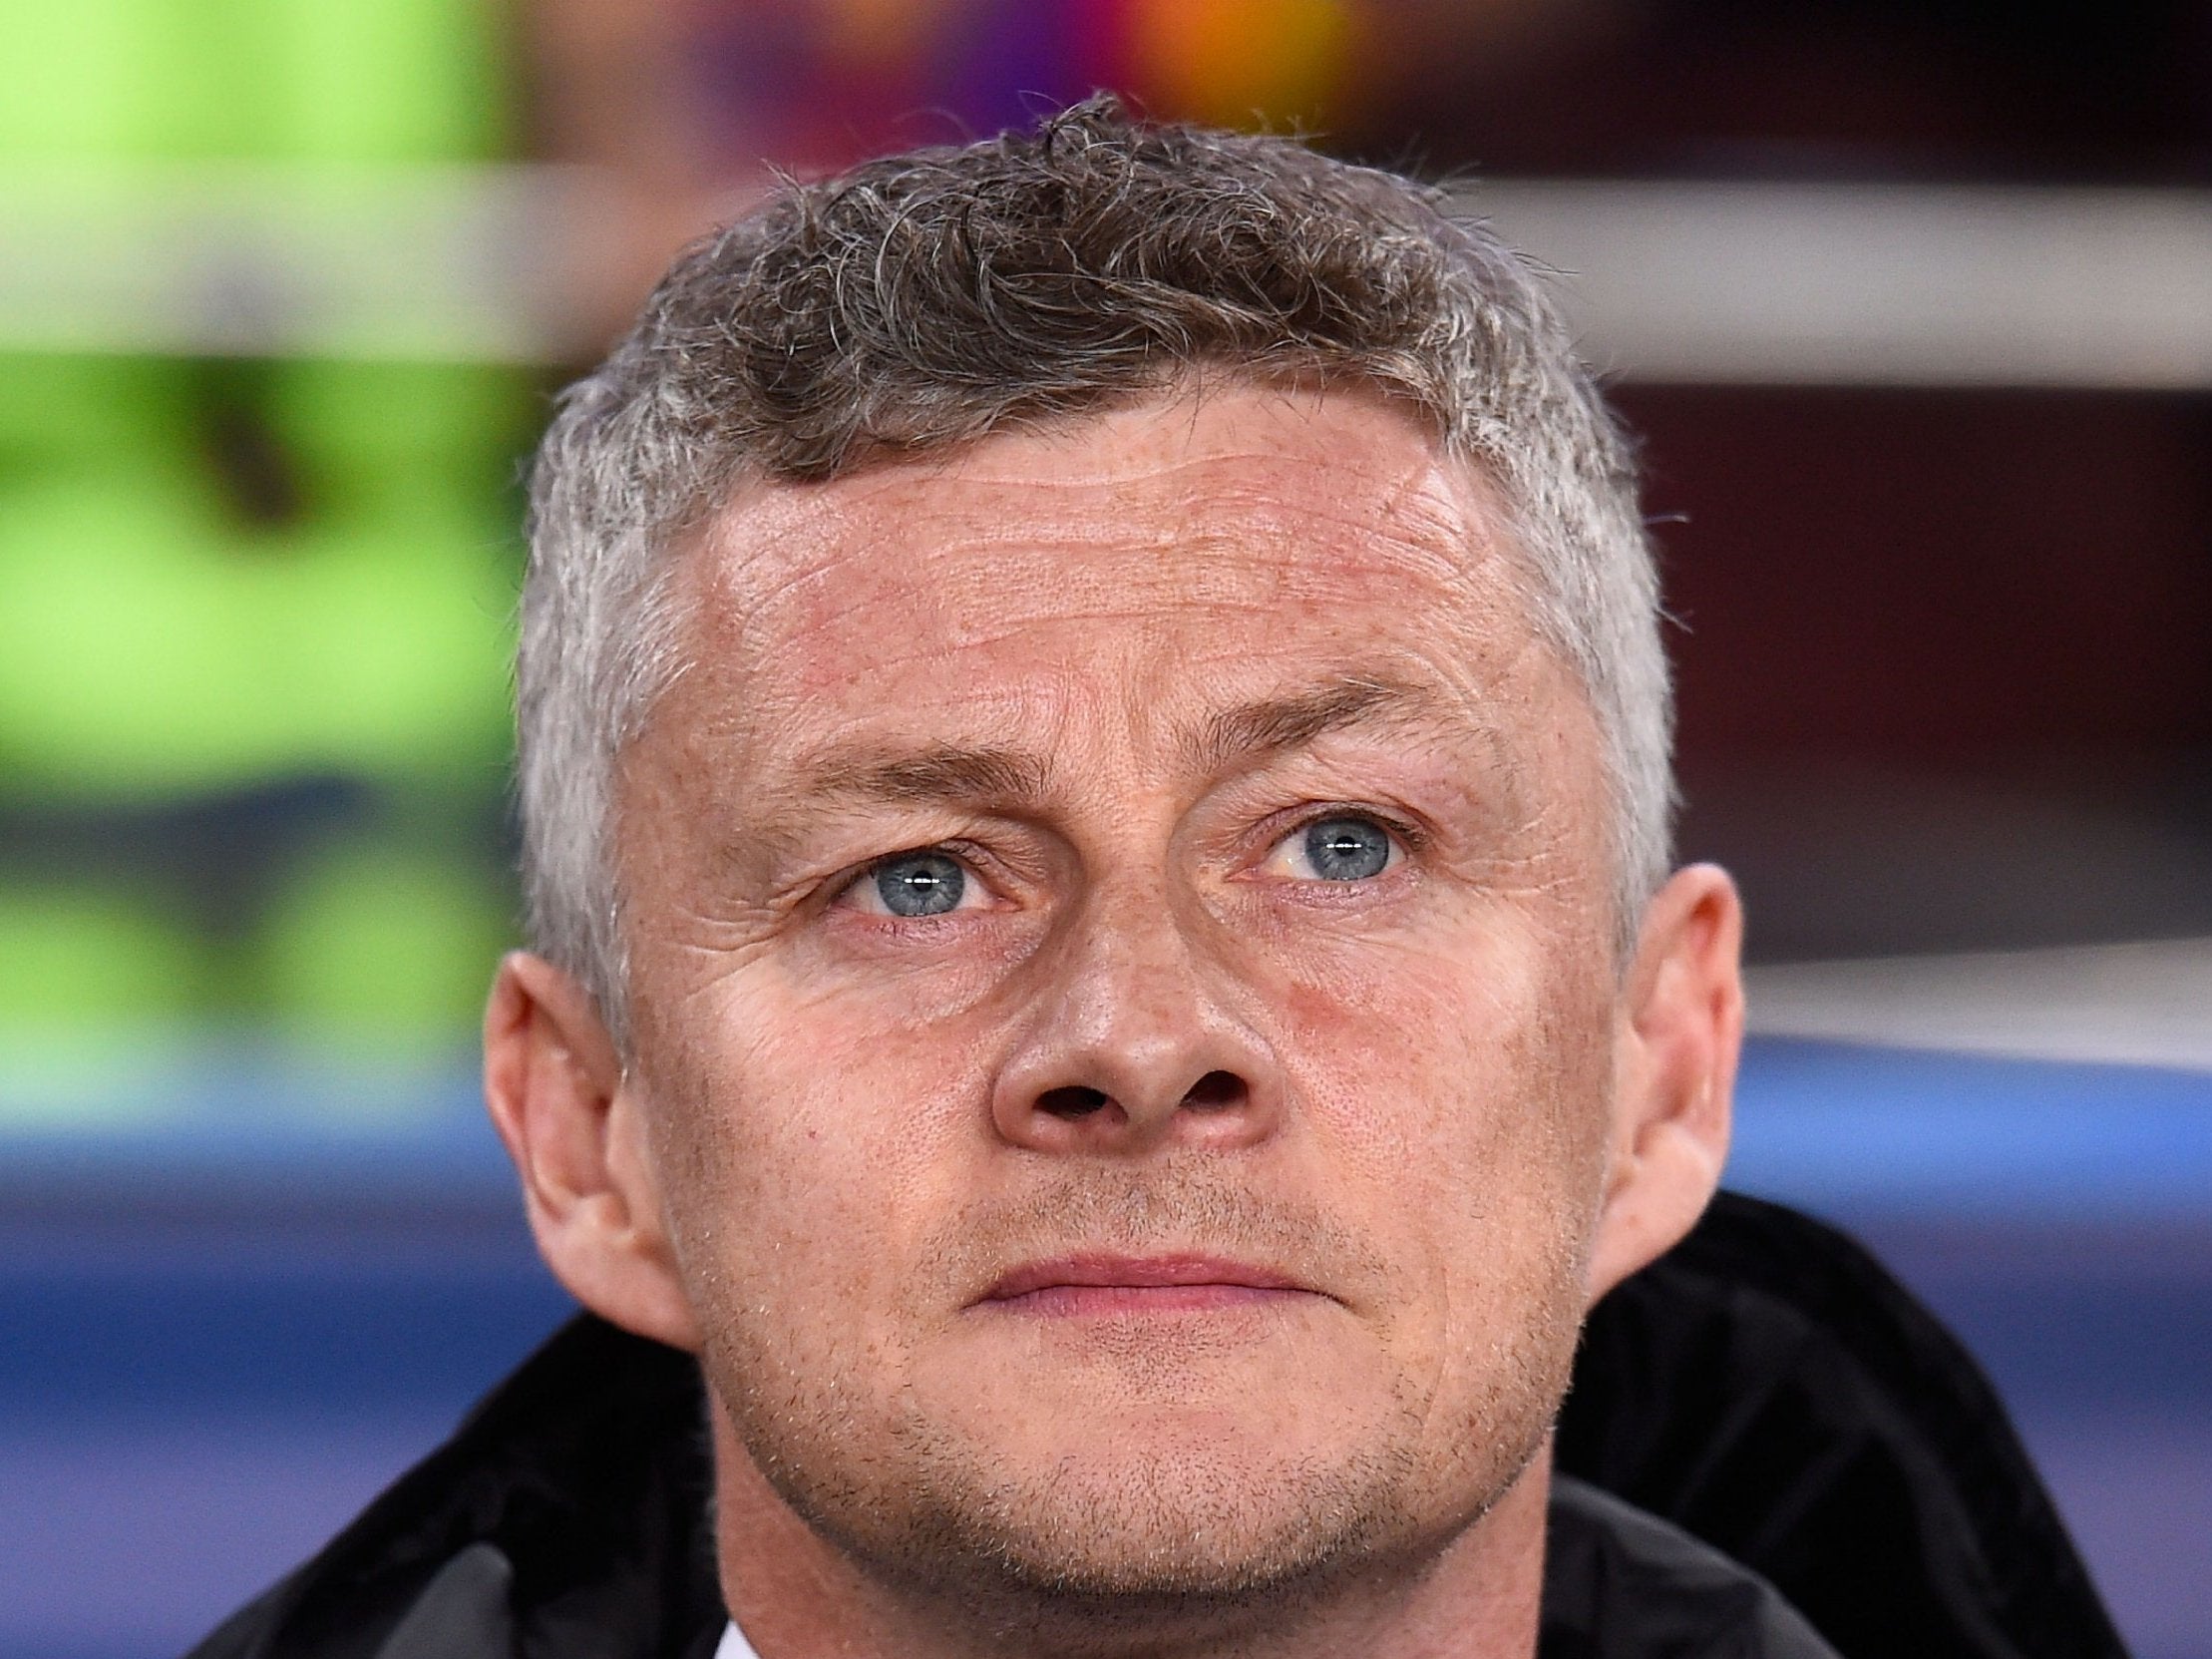 Solskjaer knows that an extensive rebuild is required at Old Trafford